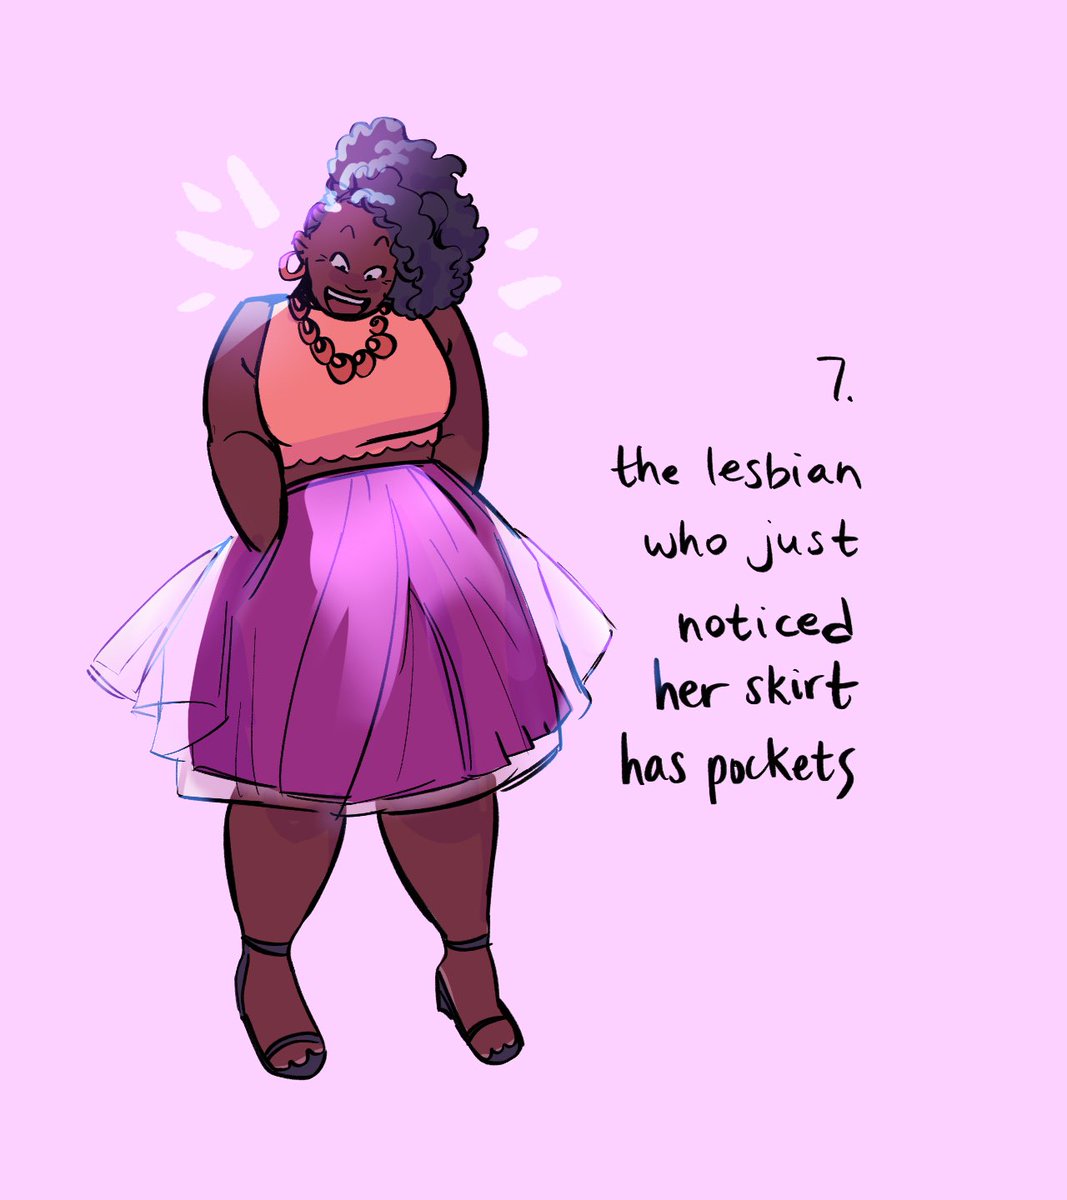 7. the lesbian who just noticed her skirt has pockets